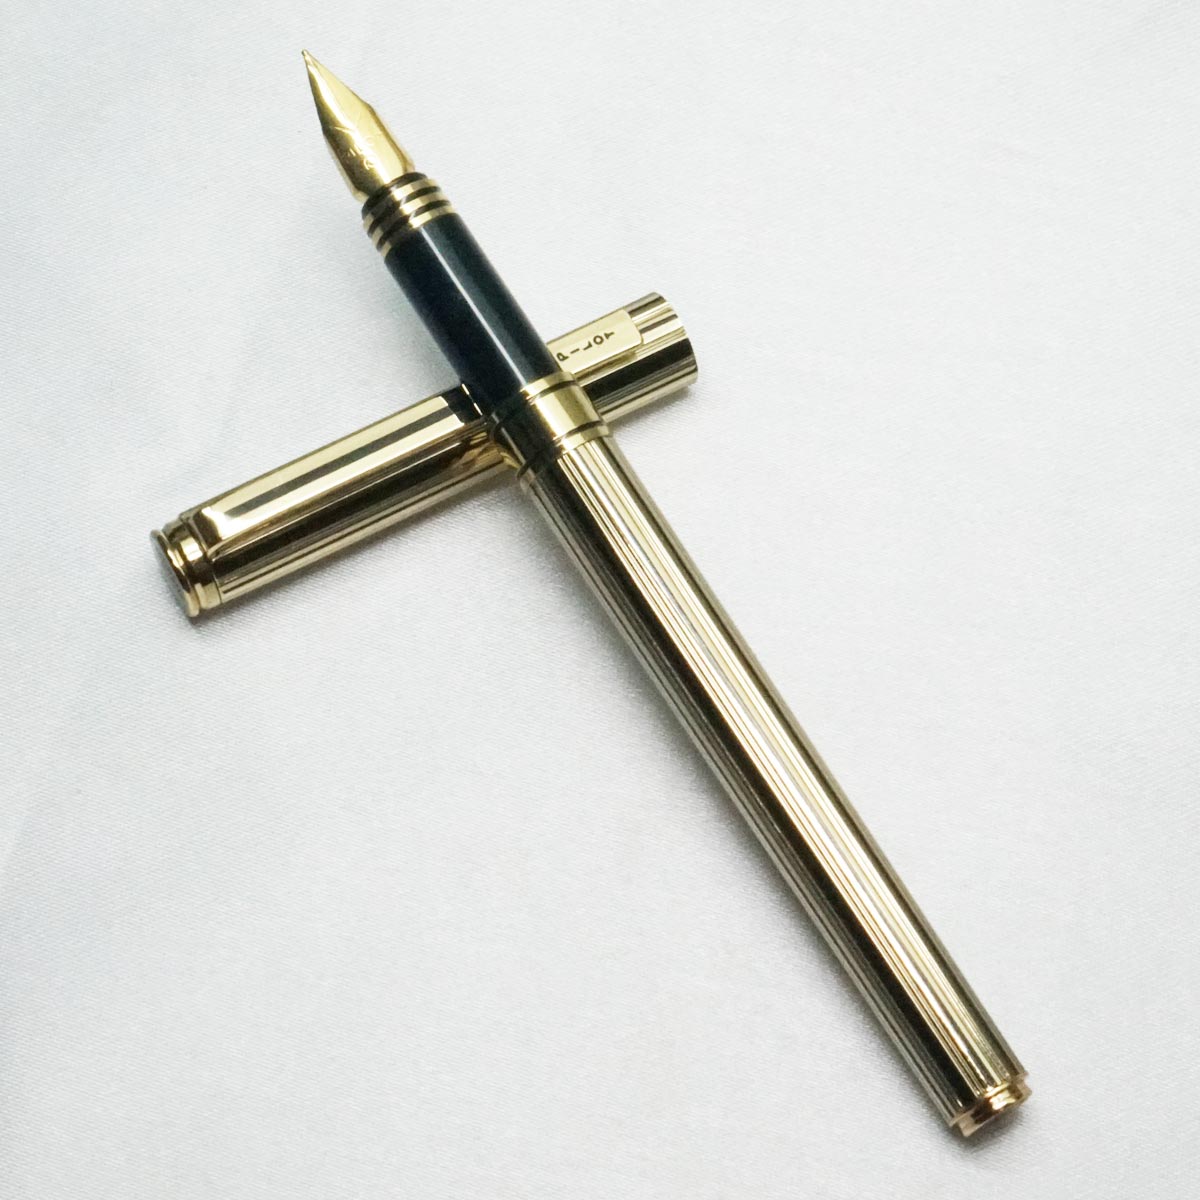 Pilot Dipper Gold stripped body and cap with Gold MB Fine Tipped Nib Converter Type Fountain Pen SKU 21636